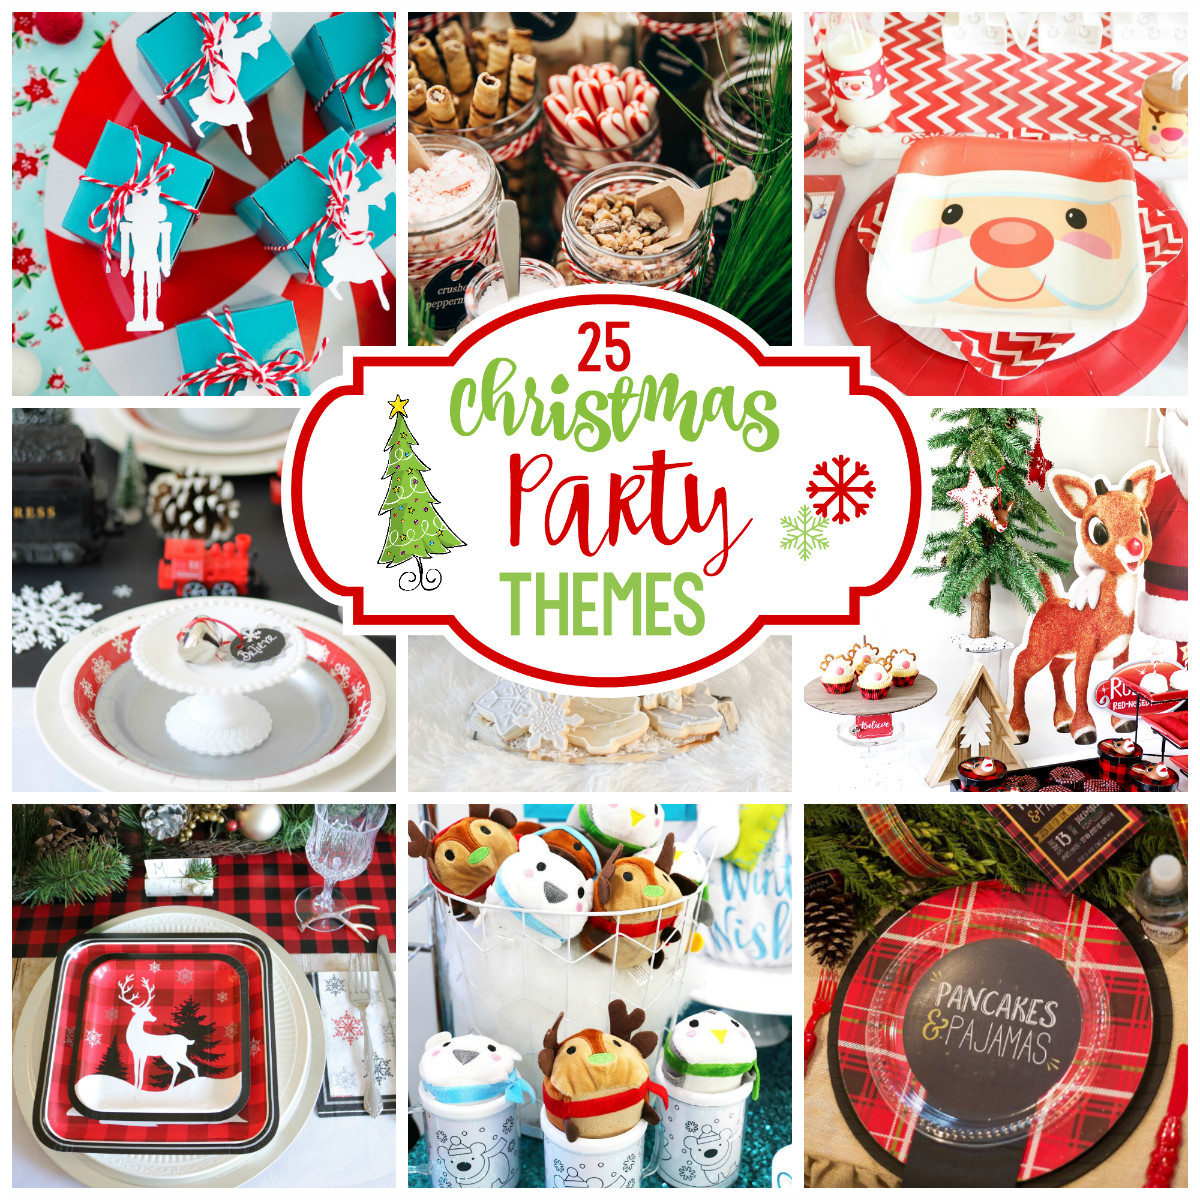 Holiday Party Ideas For Adults
 Top 100 Christmas Pajama Party Ideas For Adults